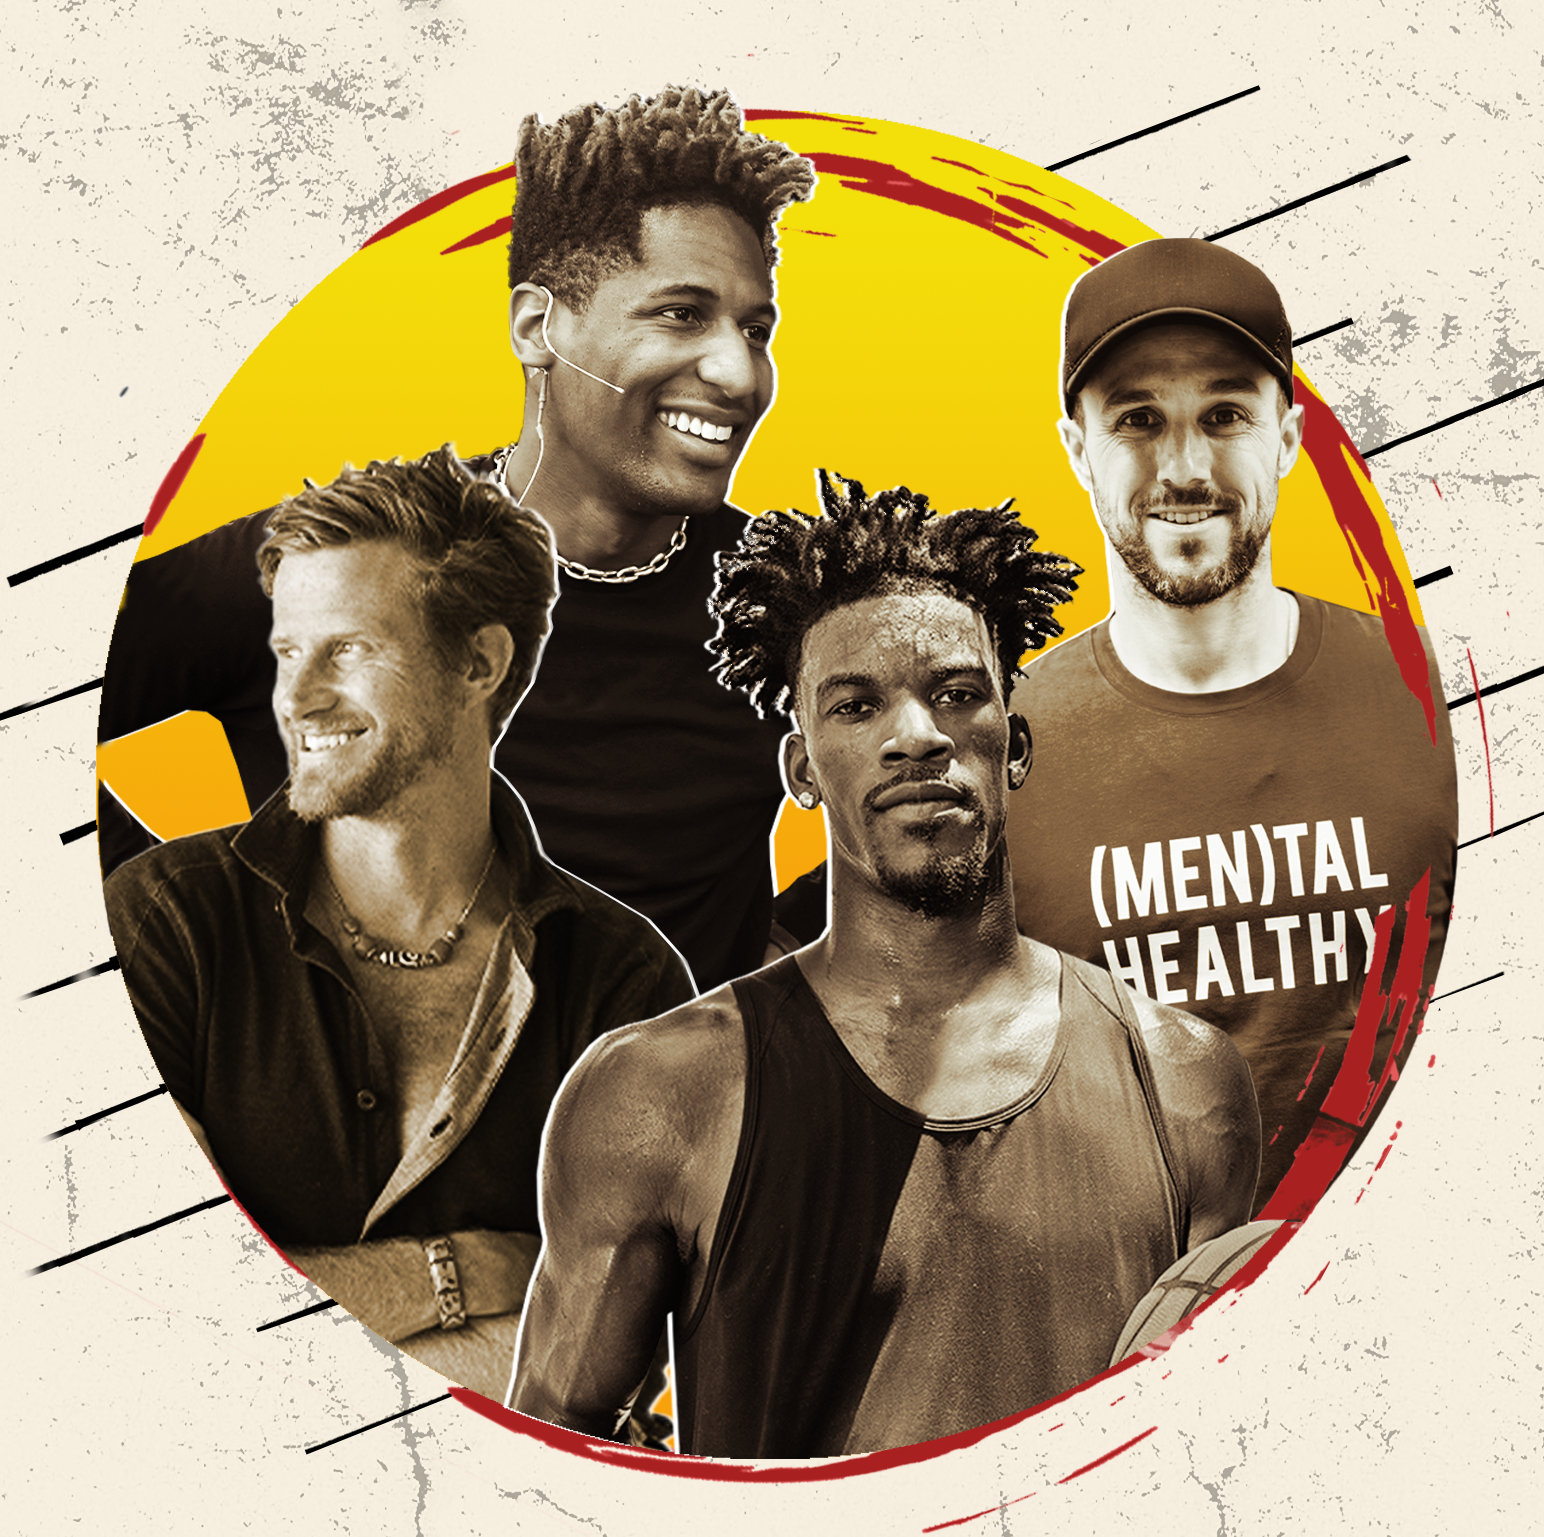 Men Don't Talk Enough About Mental Health. These 4 Guys Are Changing the Conversation.